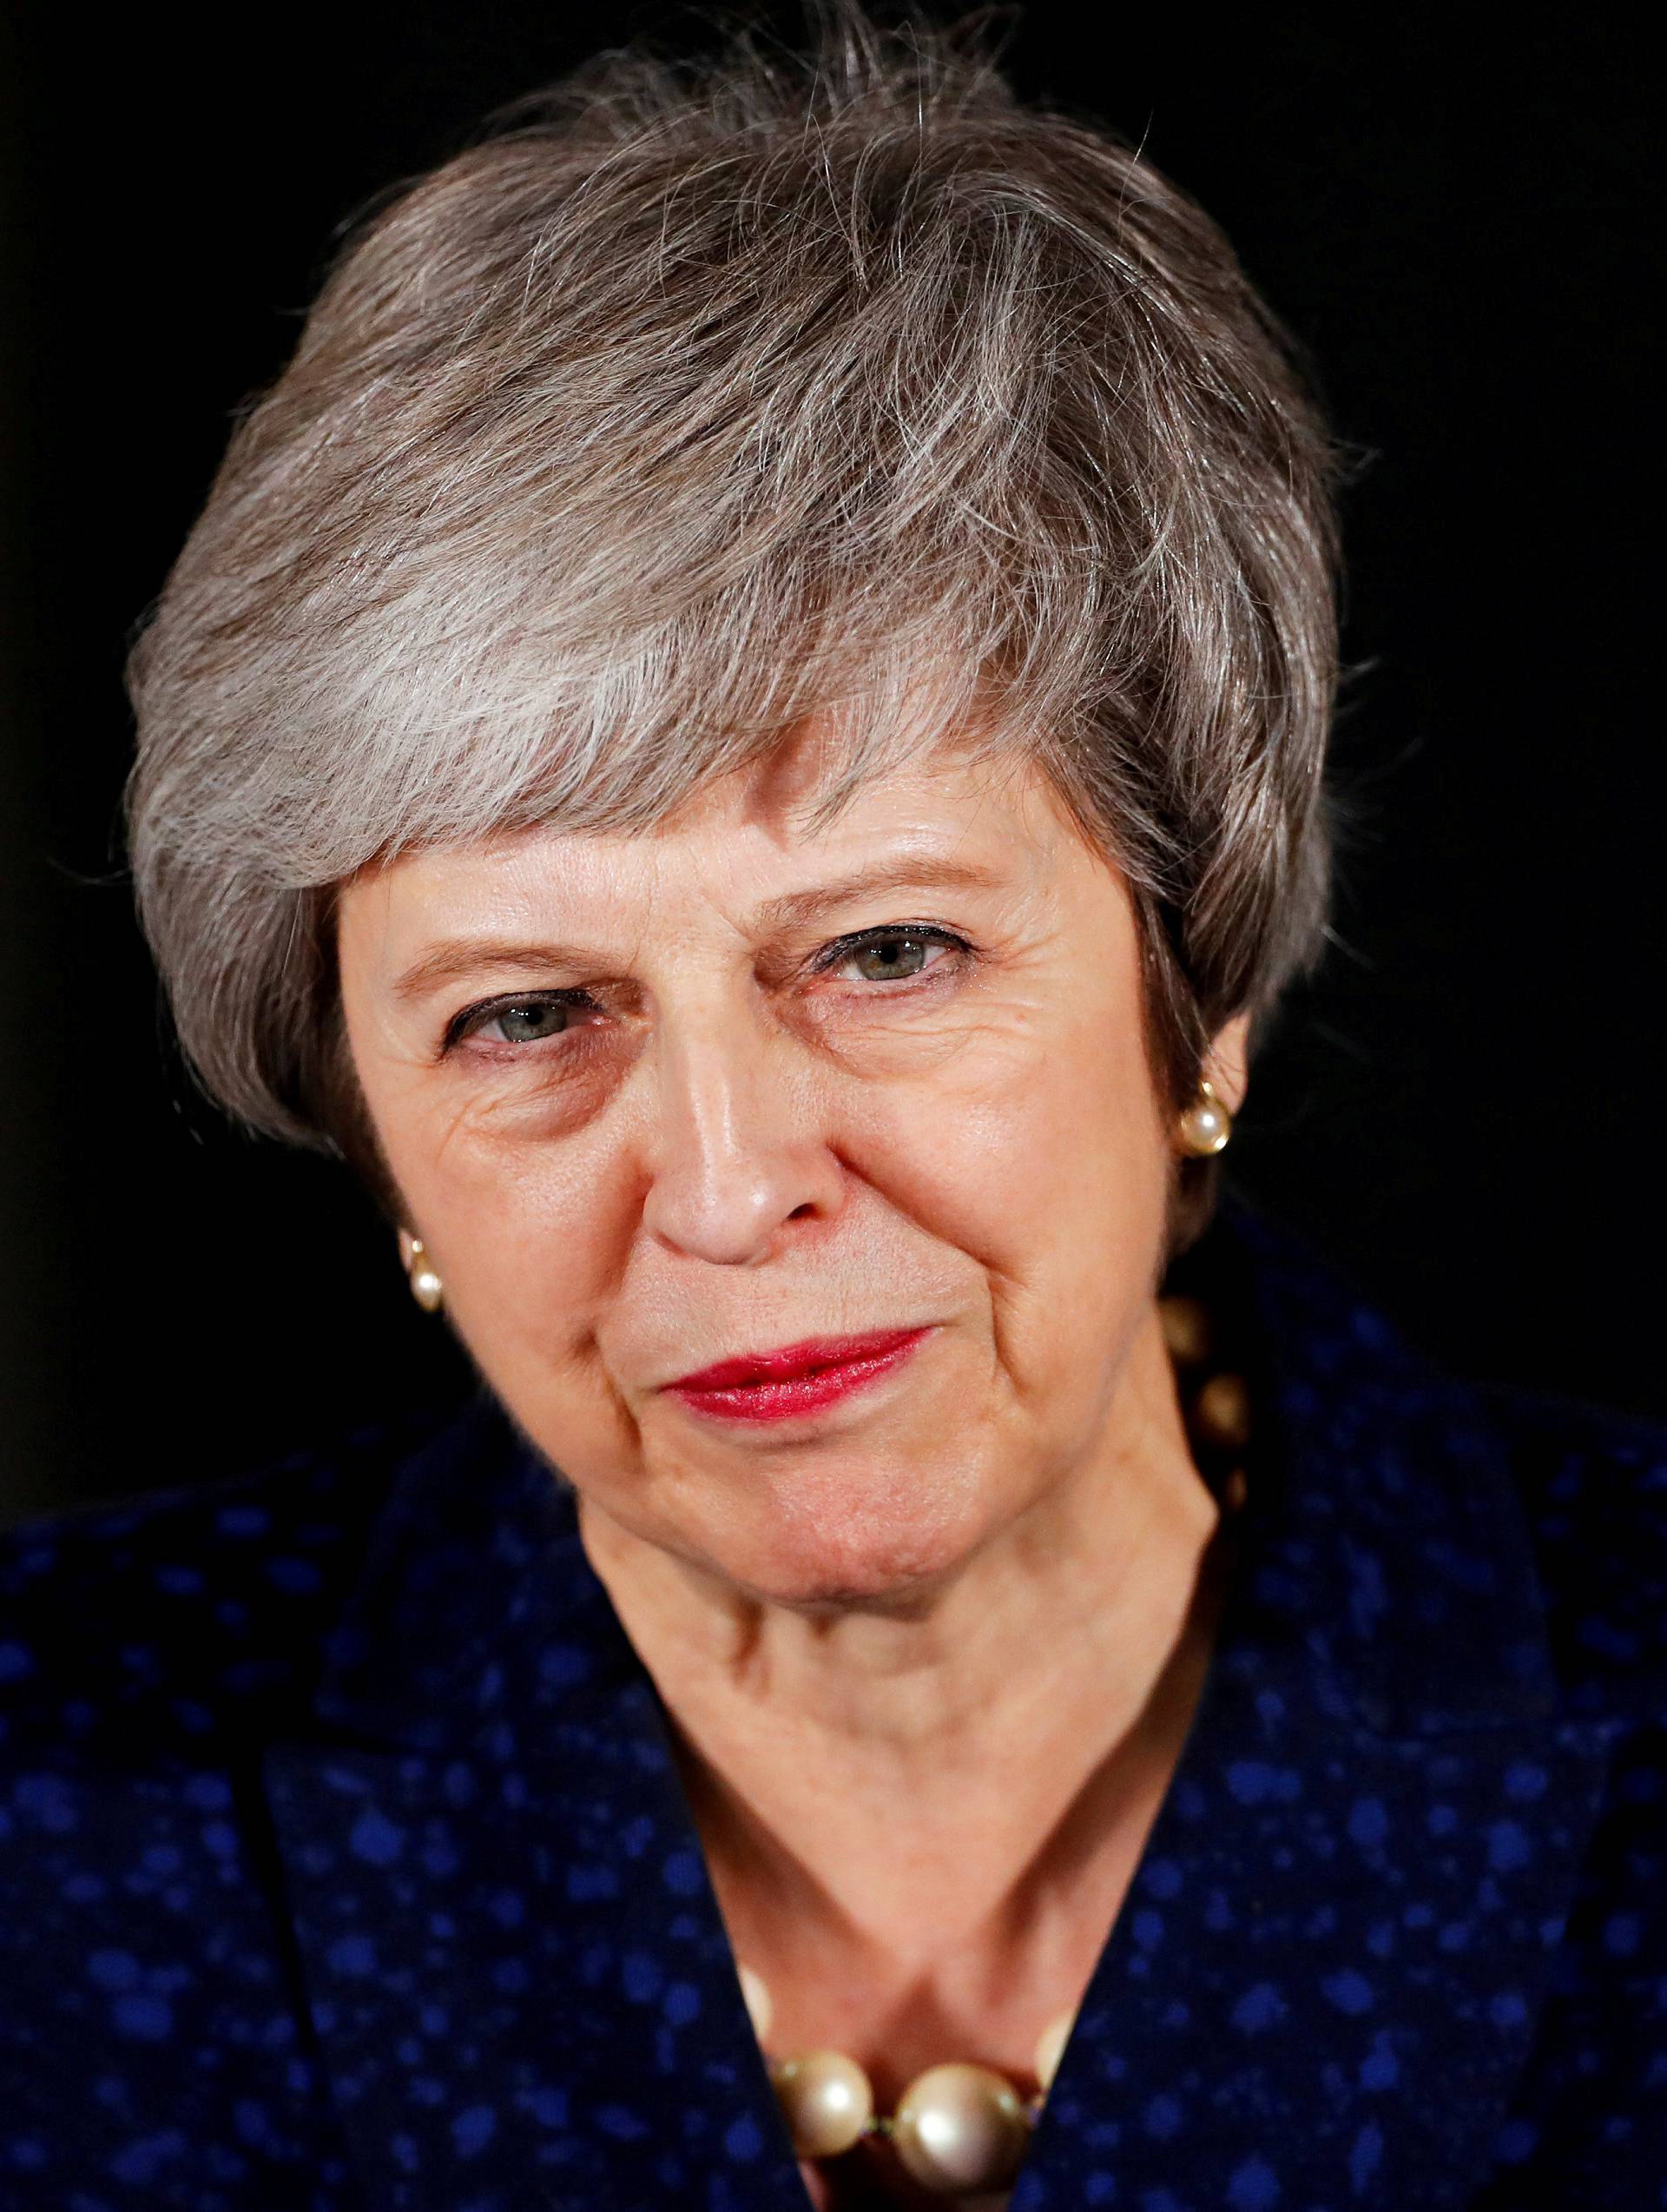 FILE PHOTO: Britain's Prime Minister Theresa May speaks outside 10 Downing Street after a confidence vote by Conservative Party members of parliament, in London